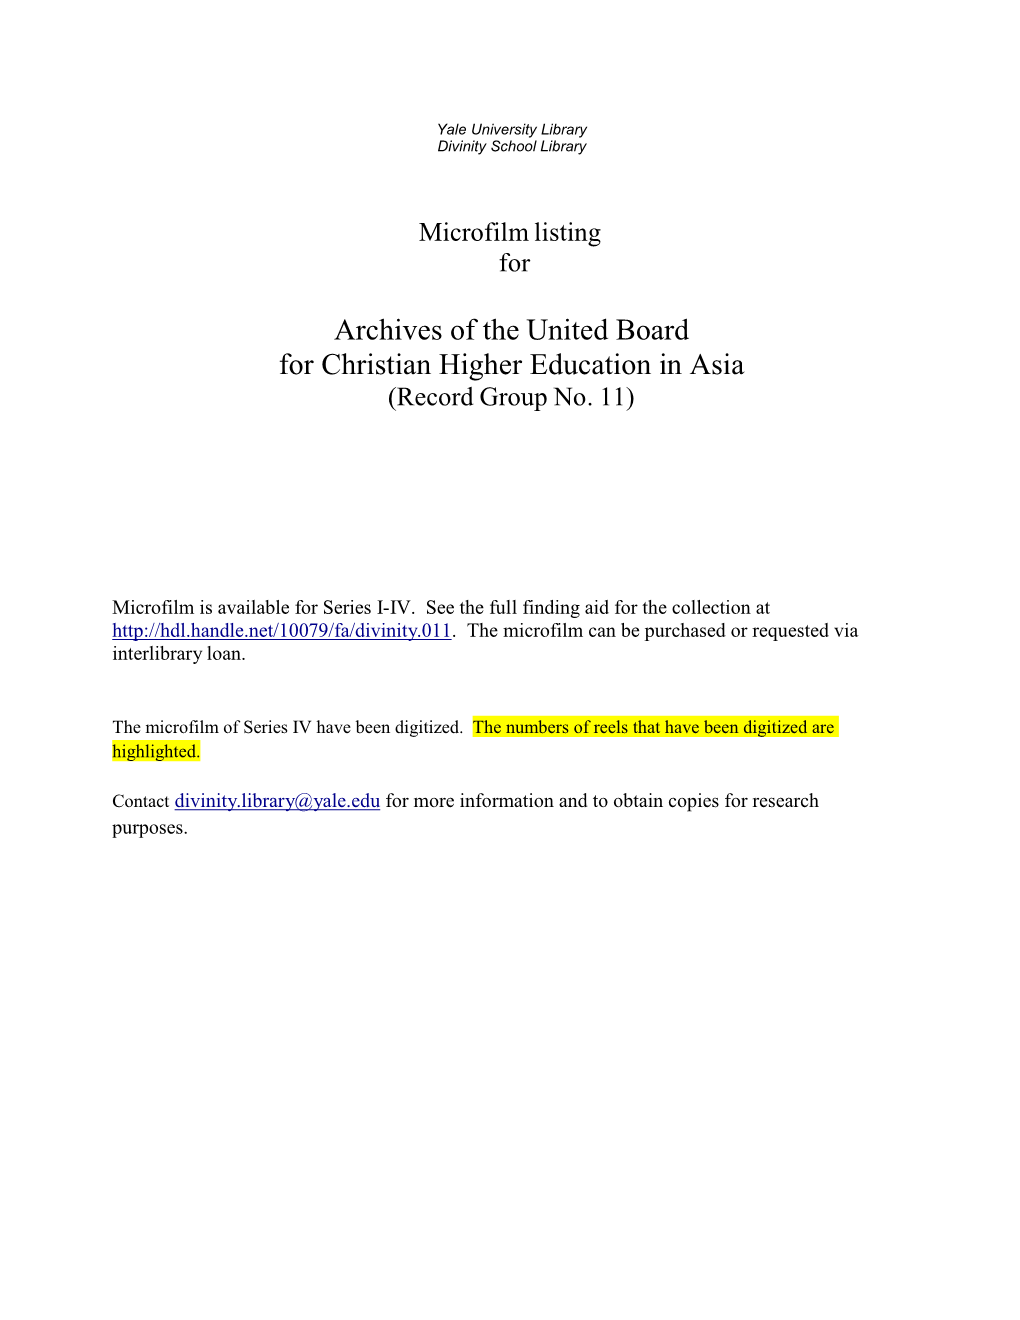 Archives of the United Board for Christian Higher Education in Asia (Record Group No